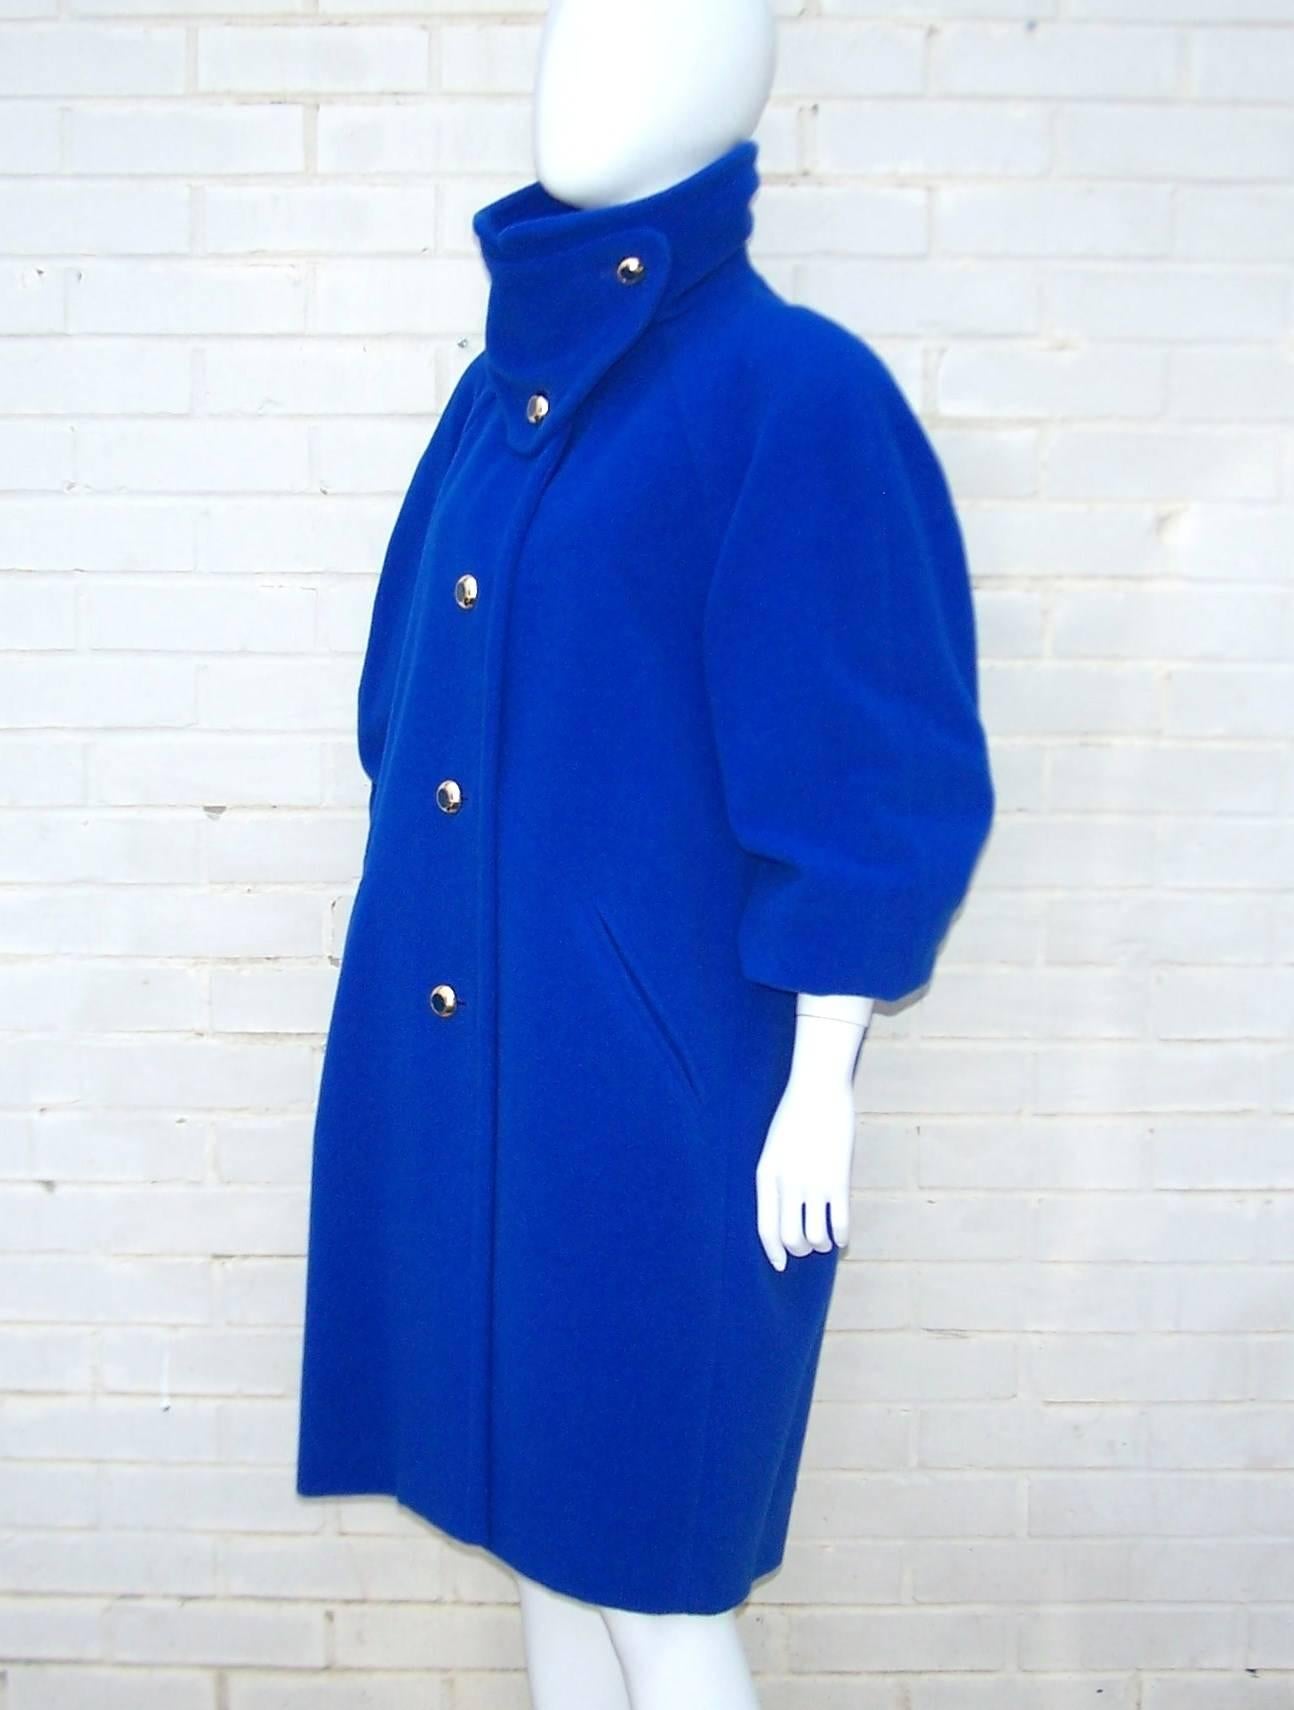 Women's 1980's Escada Electric Blue Cocoon Coat With Bib Closure & Gold Buttons